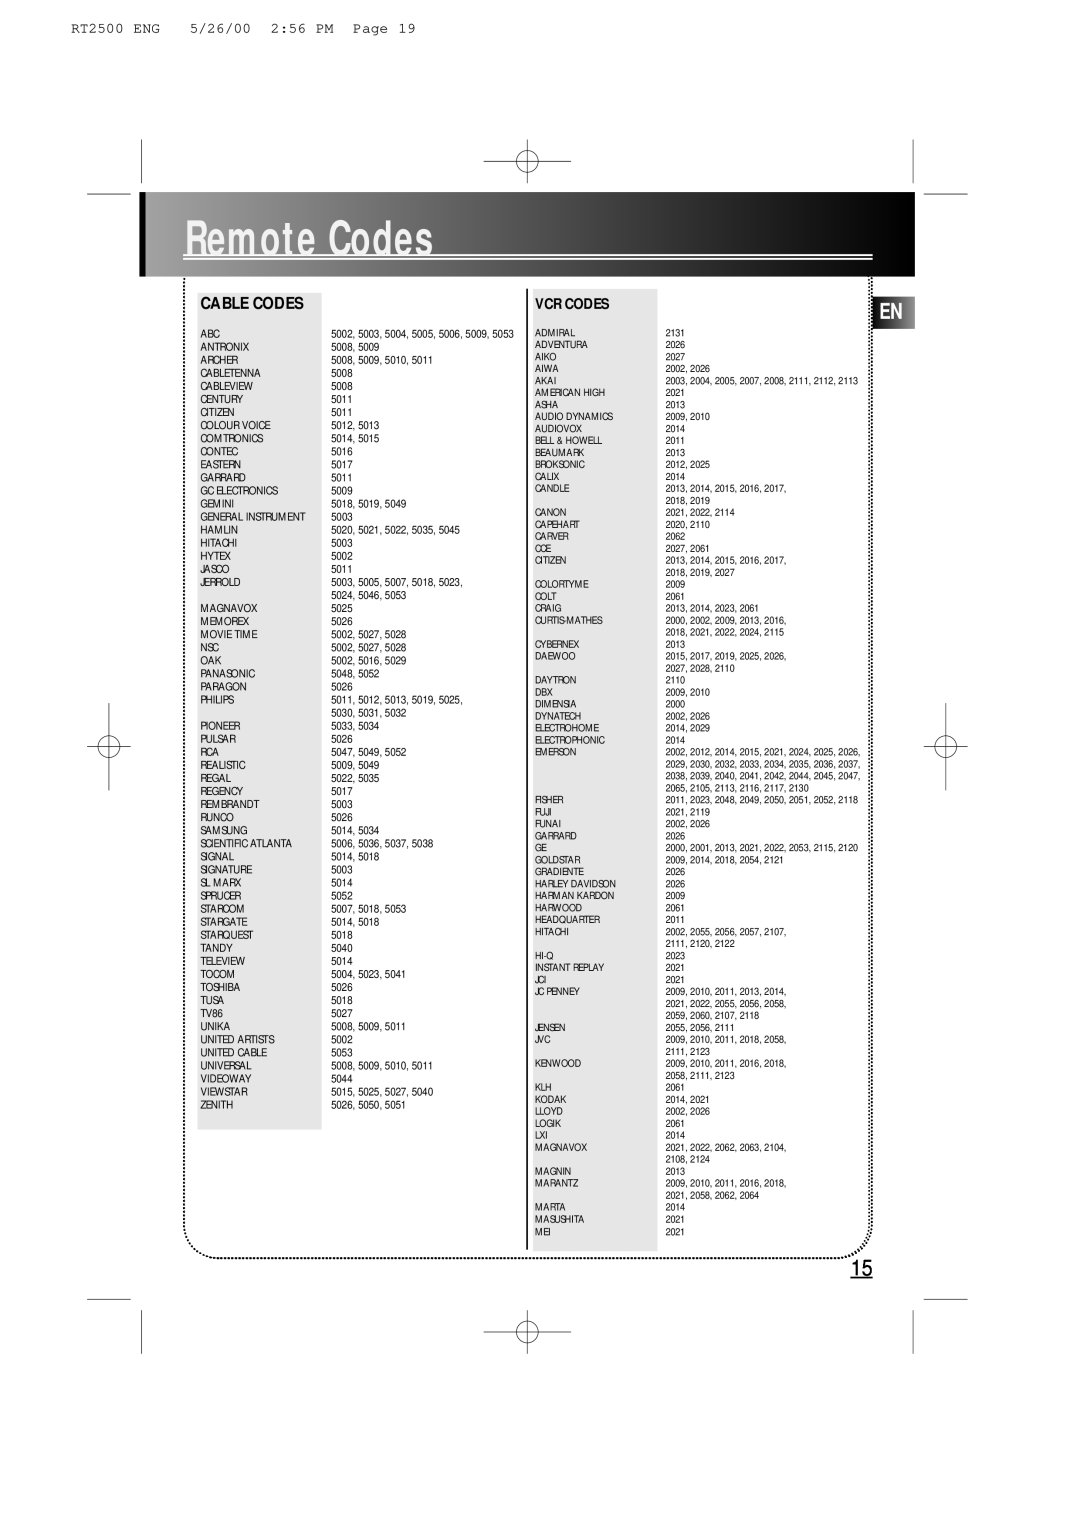 RCA RT2500R user manual RemoteCodes, Cable Codes, RT2500 ENG, 5/26/00 2 56 PM Page 